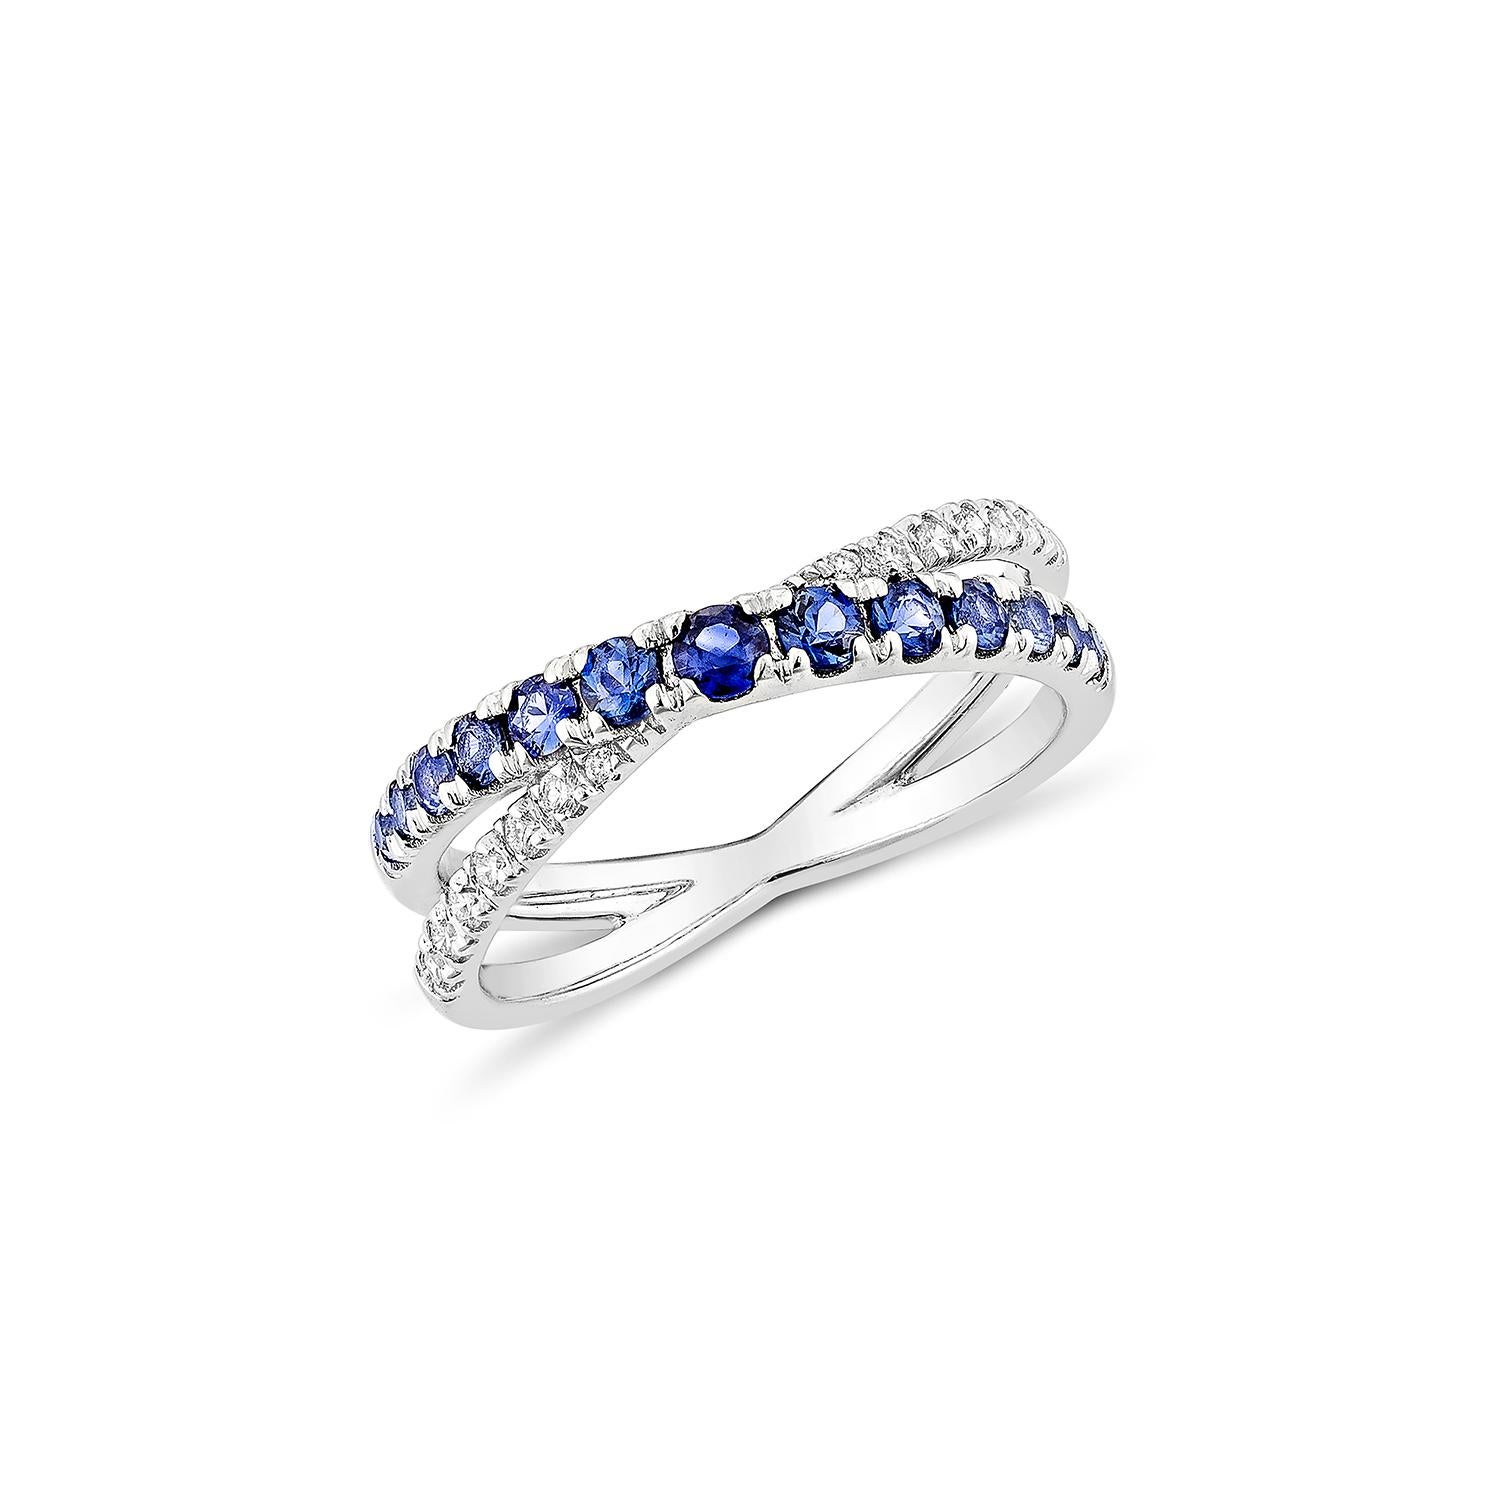 Elevate your style with our Blue Sapphire Stackable Ring, adorned with a dazzling blue sapphire and white diamond nestled in 14Karat White Gold. Delicate yet captivating, this ring adds a touch of elegance to any look, whether worn alone or stacked